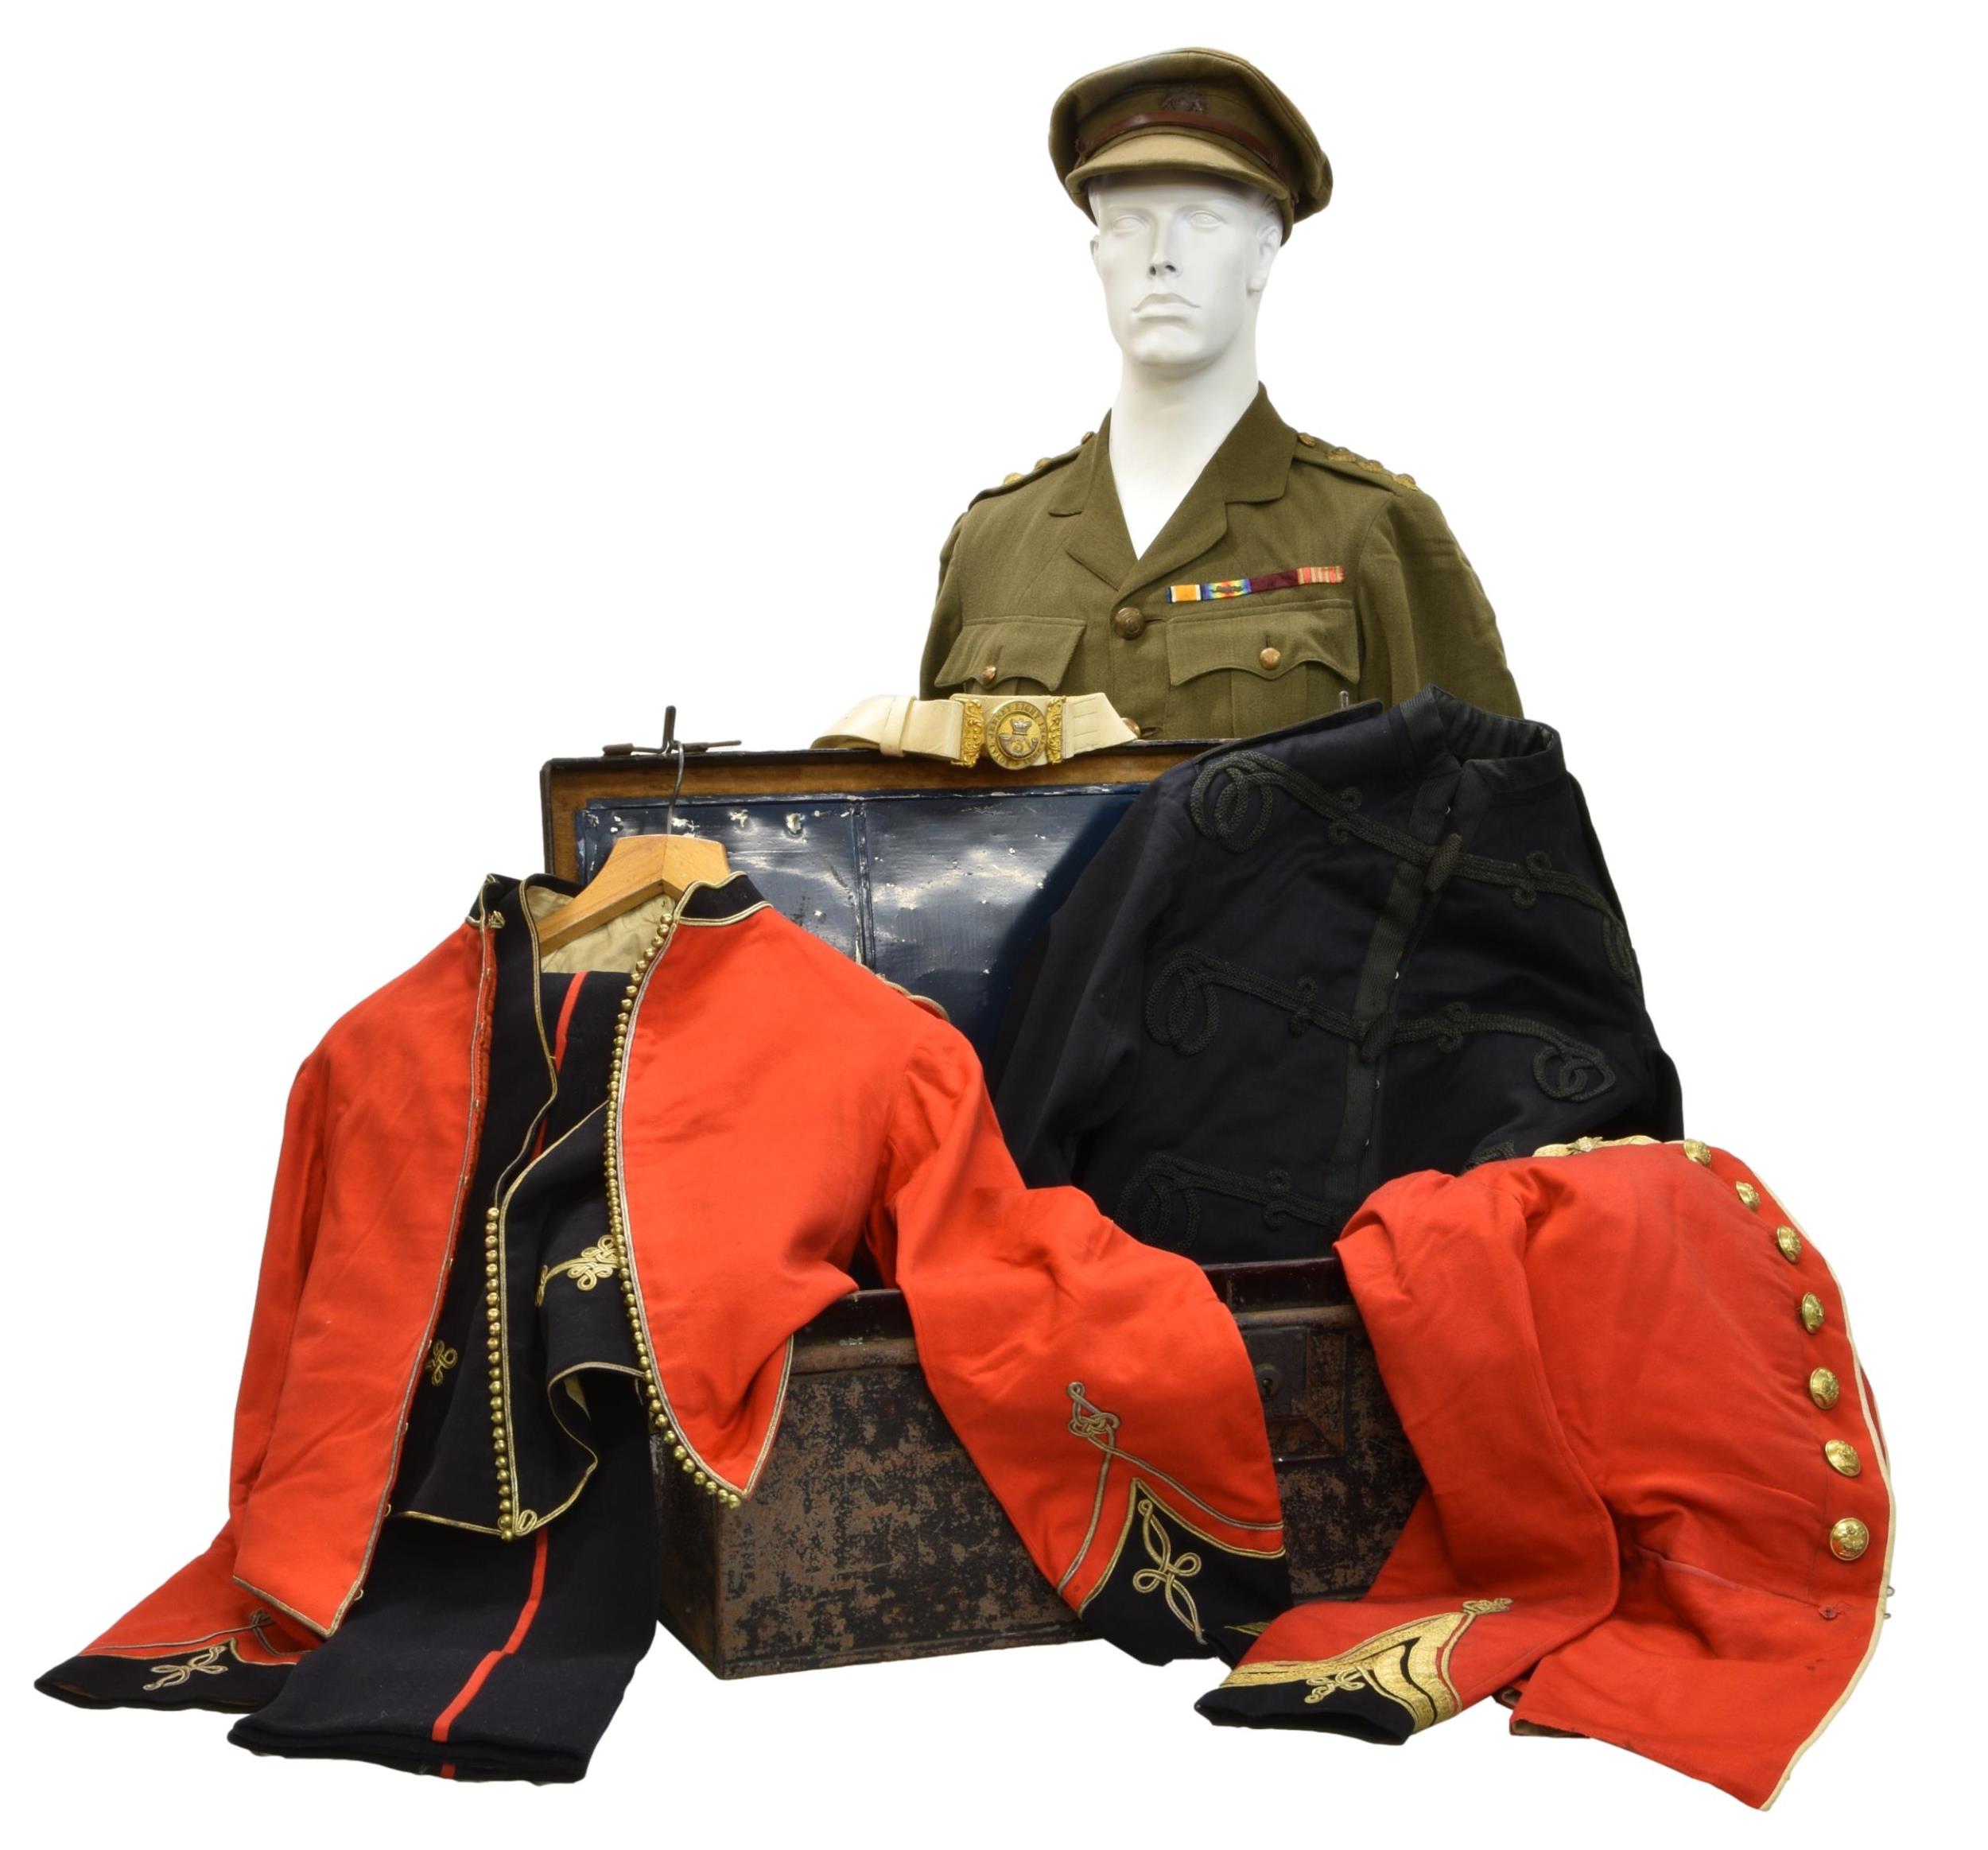 Royal Jersey Infantry interest - Lord Alexander Coutanche's uniforms contained in metal trunk, the